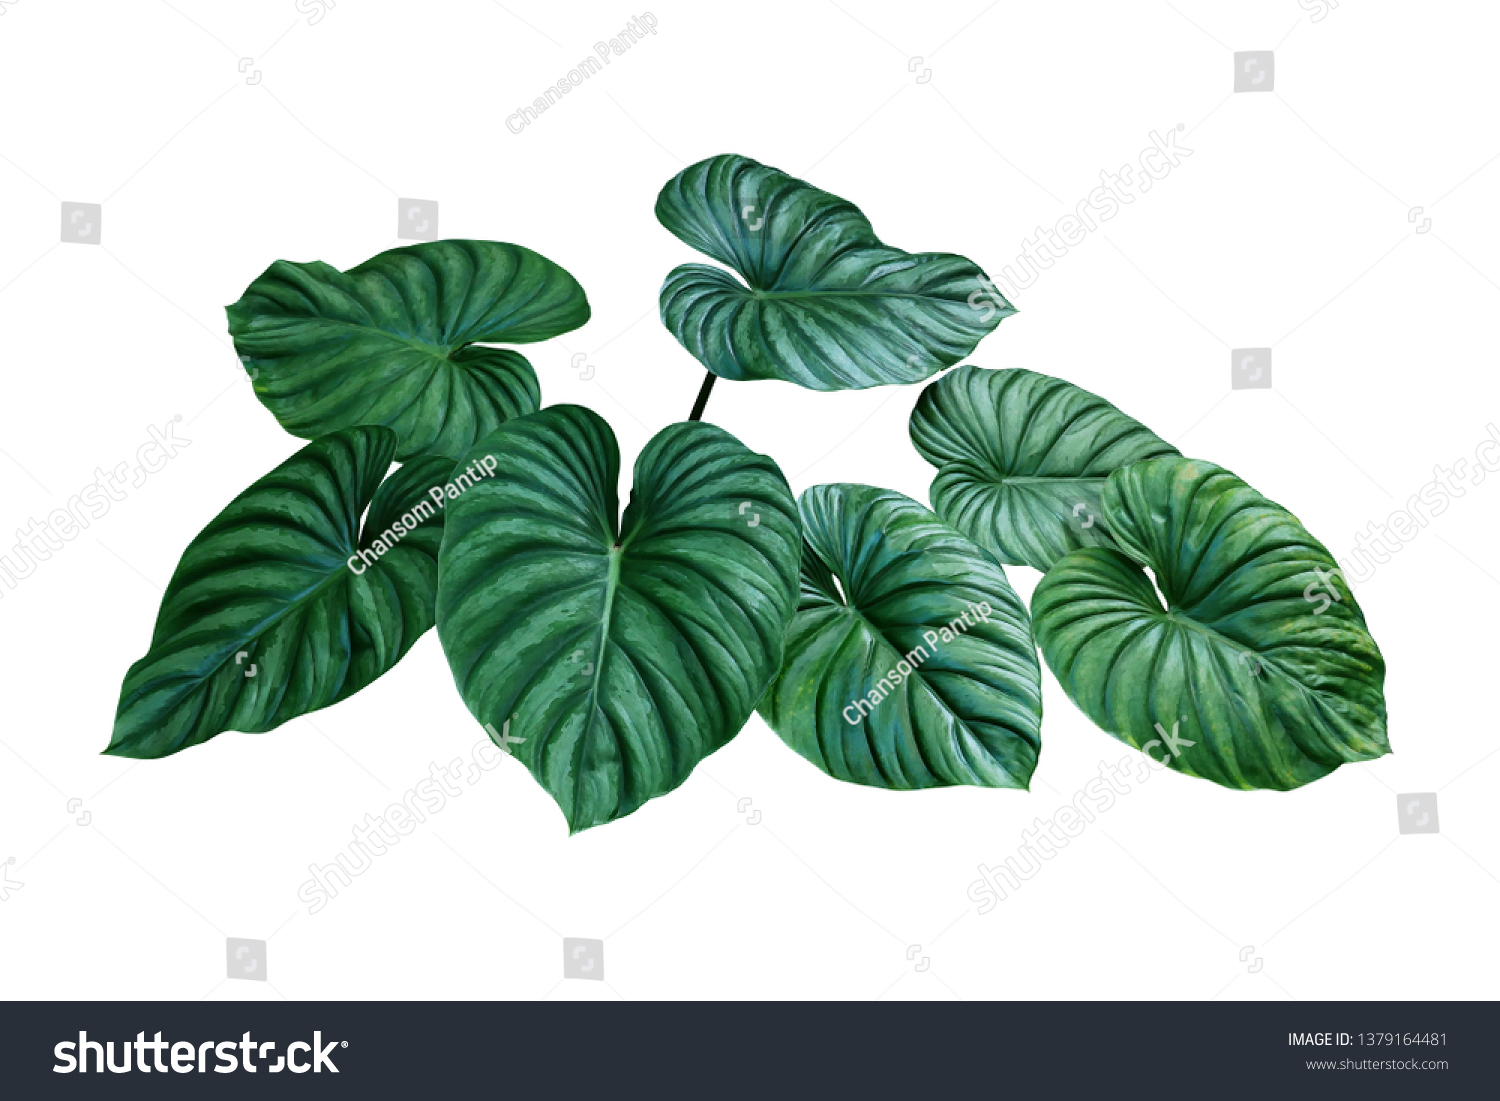 Heart shaped bicolors leaves of Philodendron plowmanii the rare exotic rainforest foliage plant isolated on white background, clipping path included. #1379164481